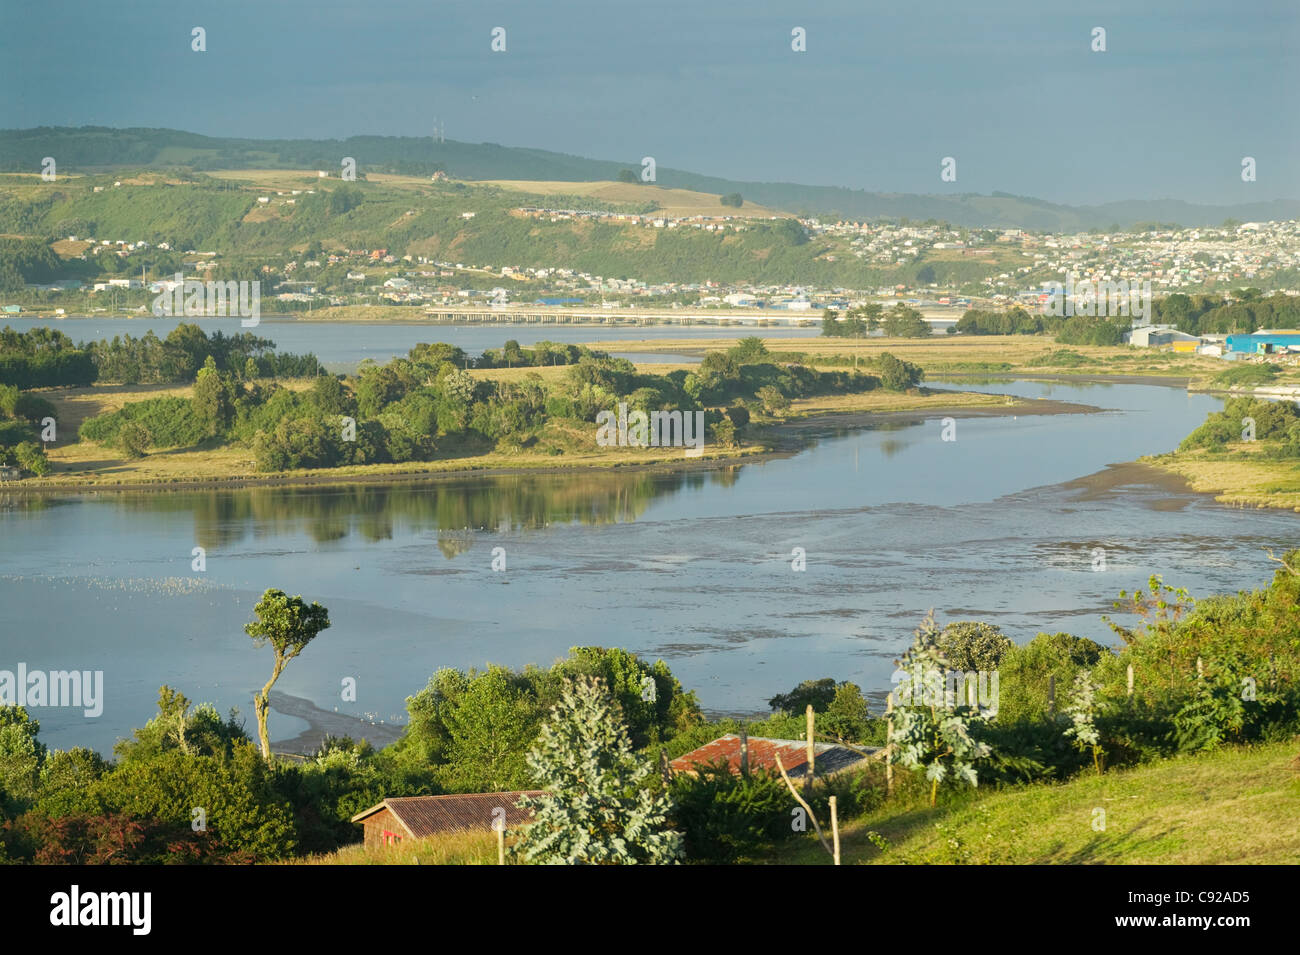 Chile, Chiloe, view across countryside near Ancud Stock Photo